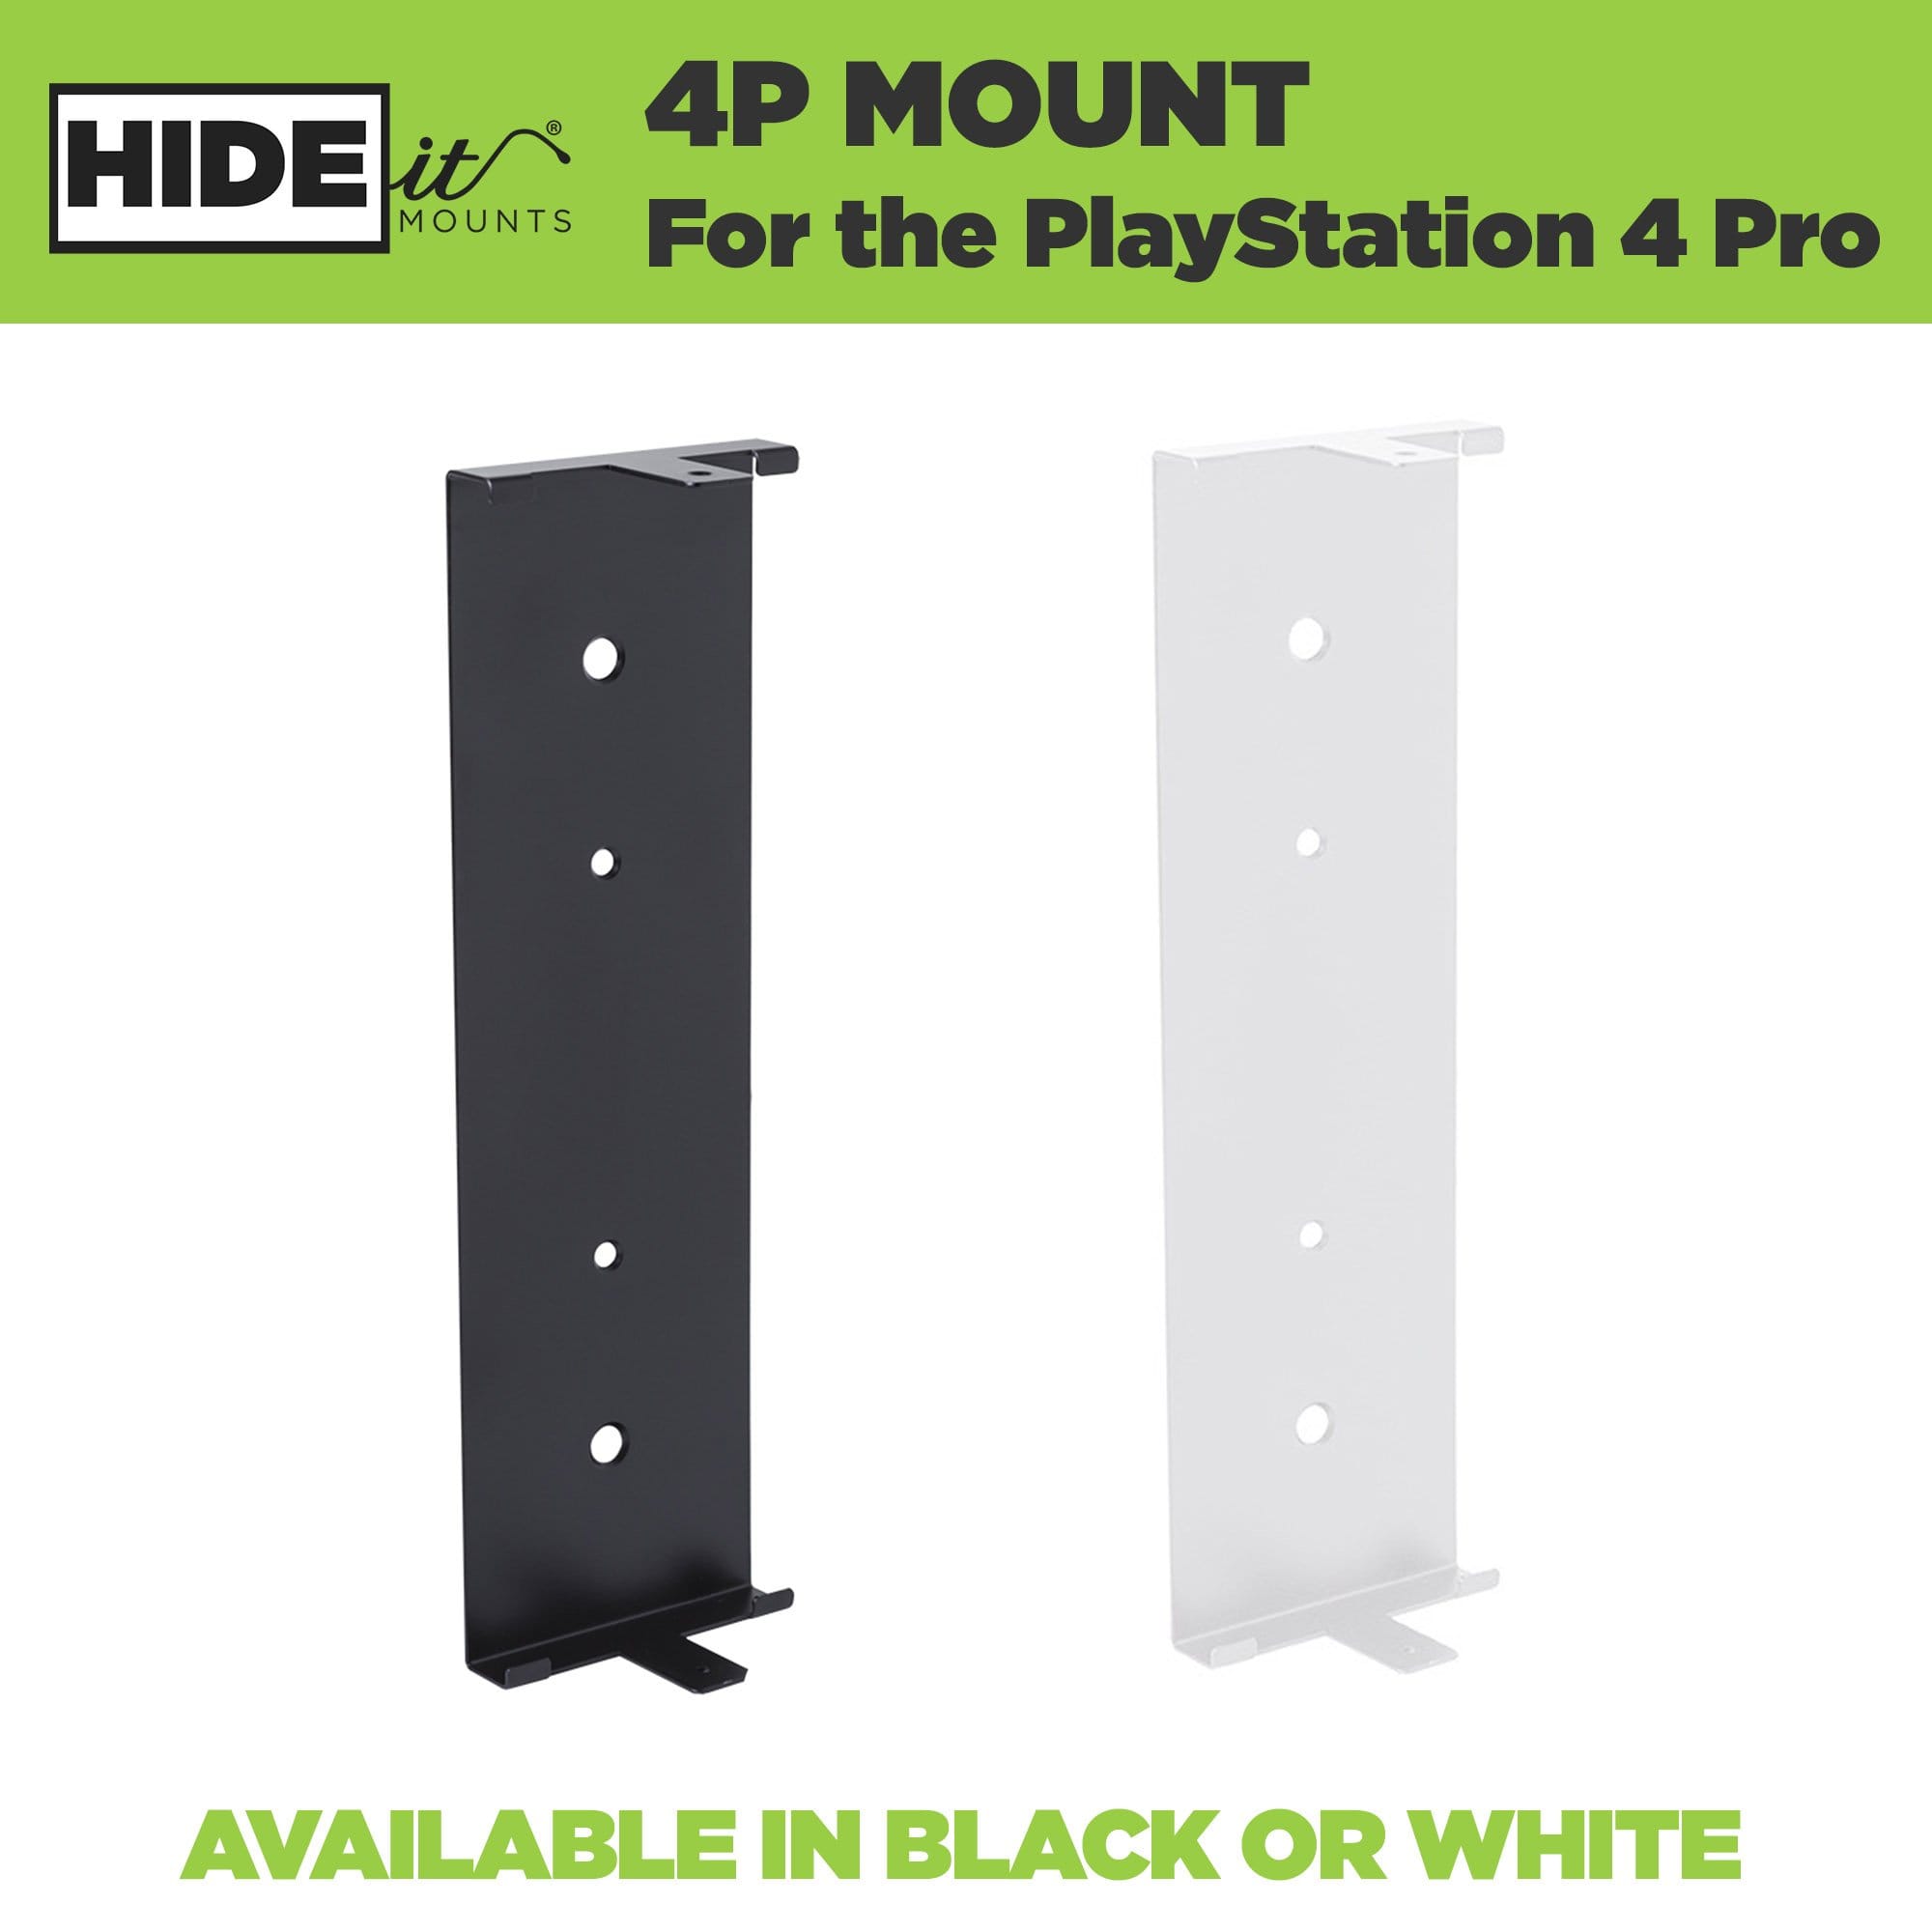 Steel wall mount for PS4 Pro, made by HIDEit Mounts in black or white